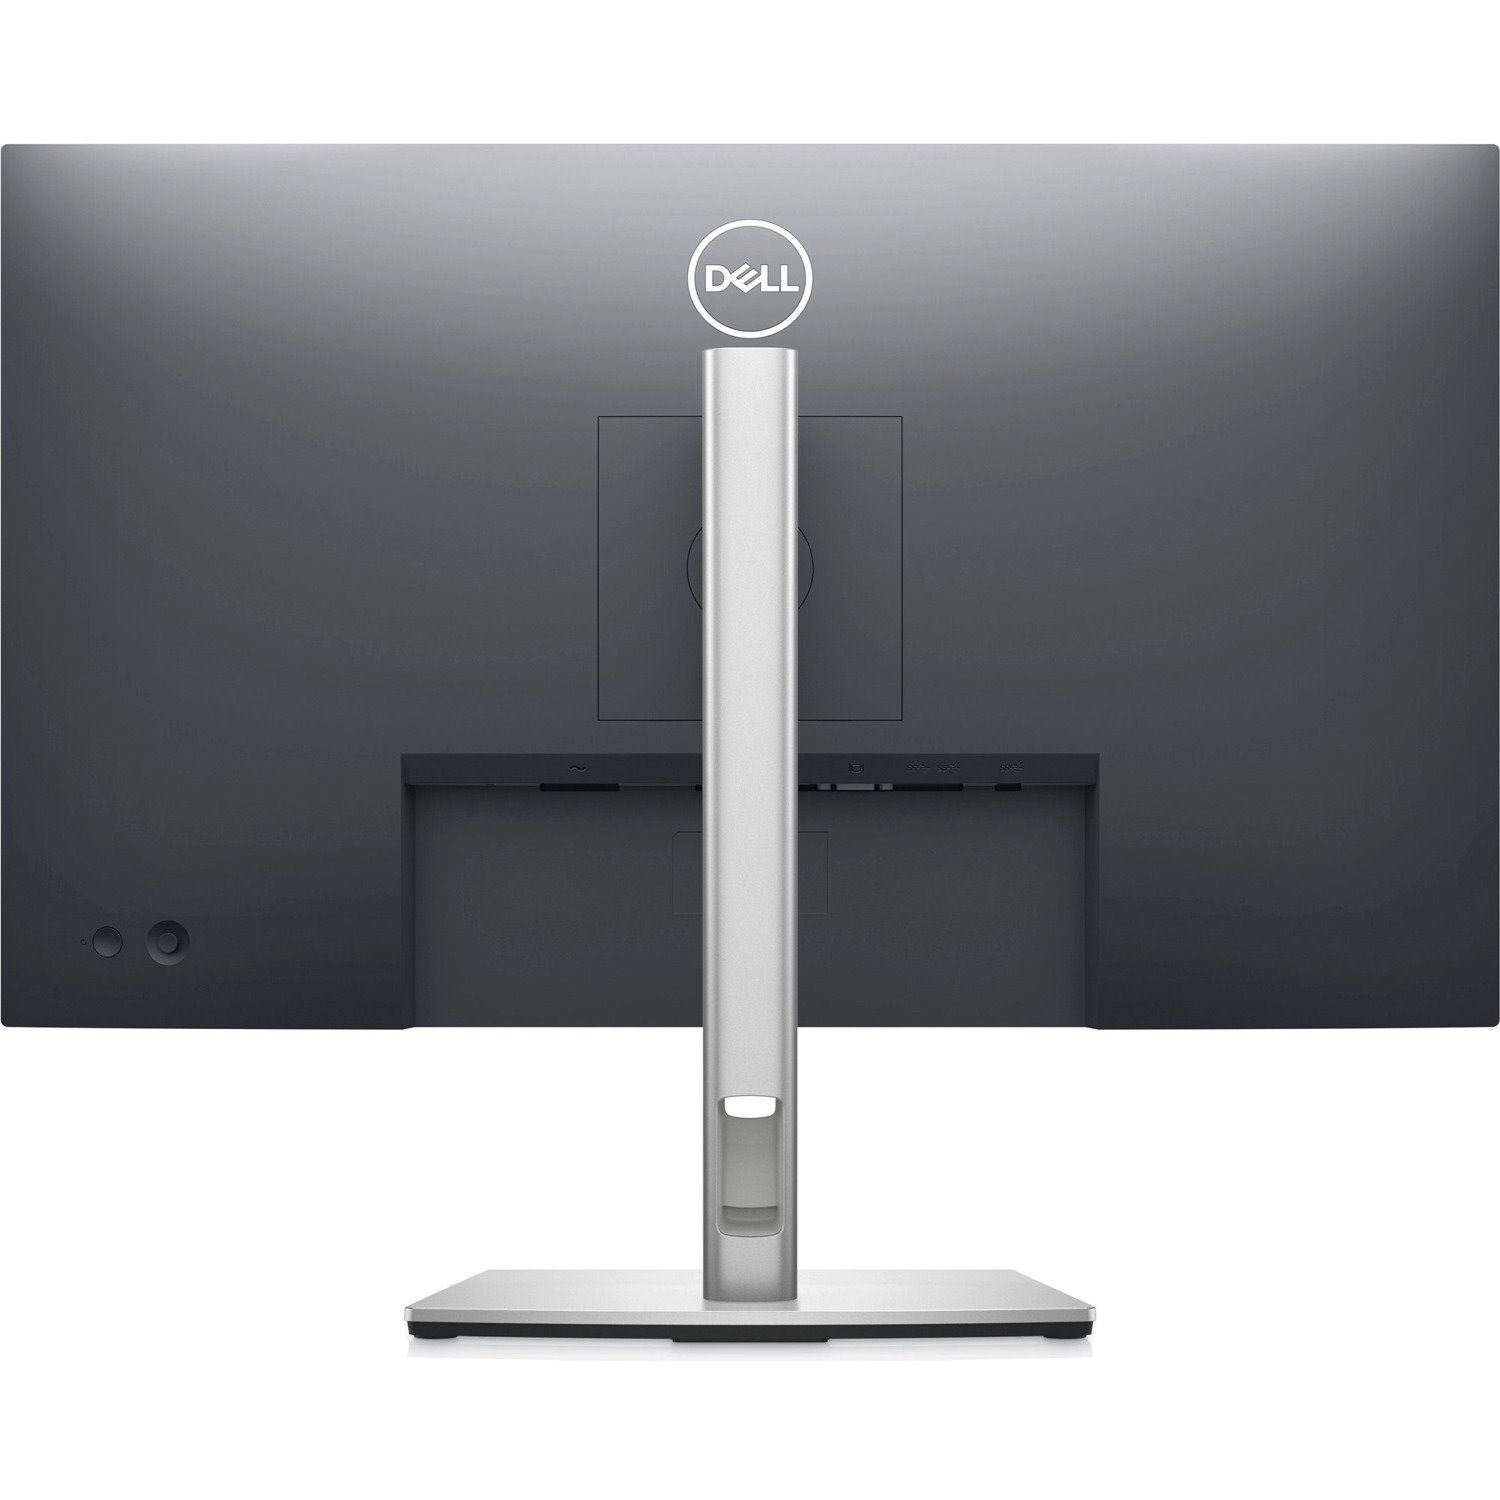 Dell P2722HE 27" Full HD WLED LCD Monitor - 16:9 - Black, Silver